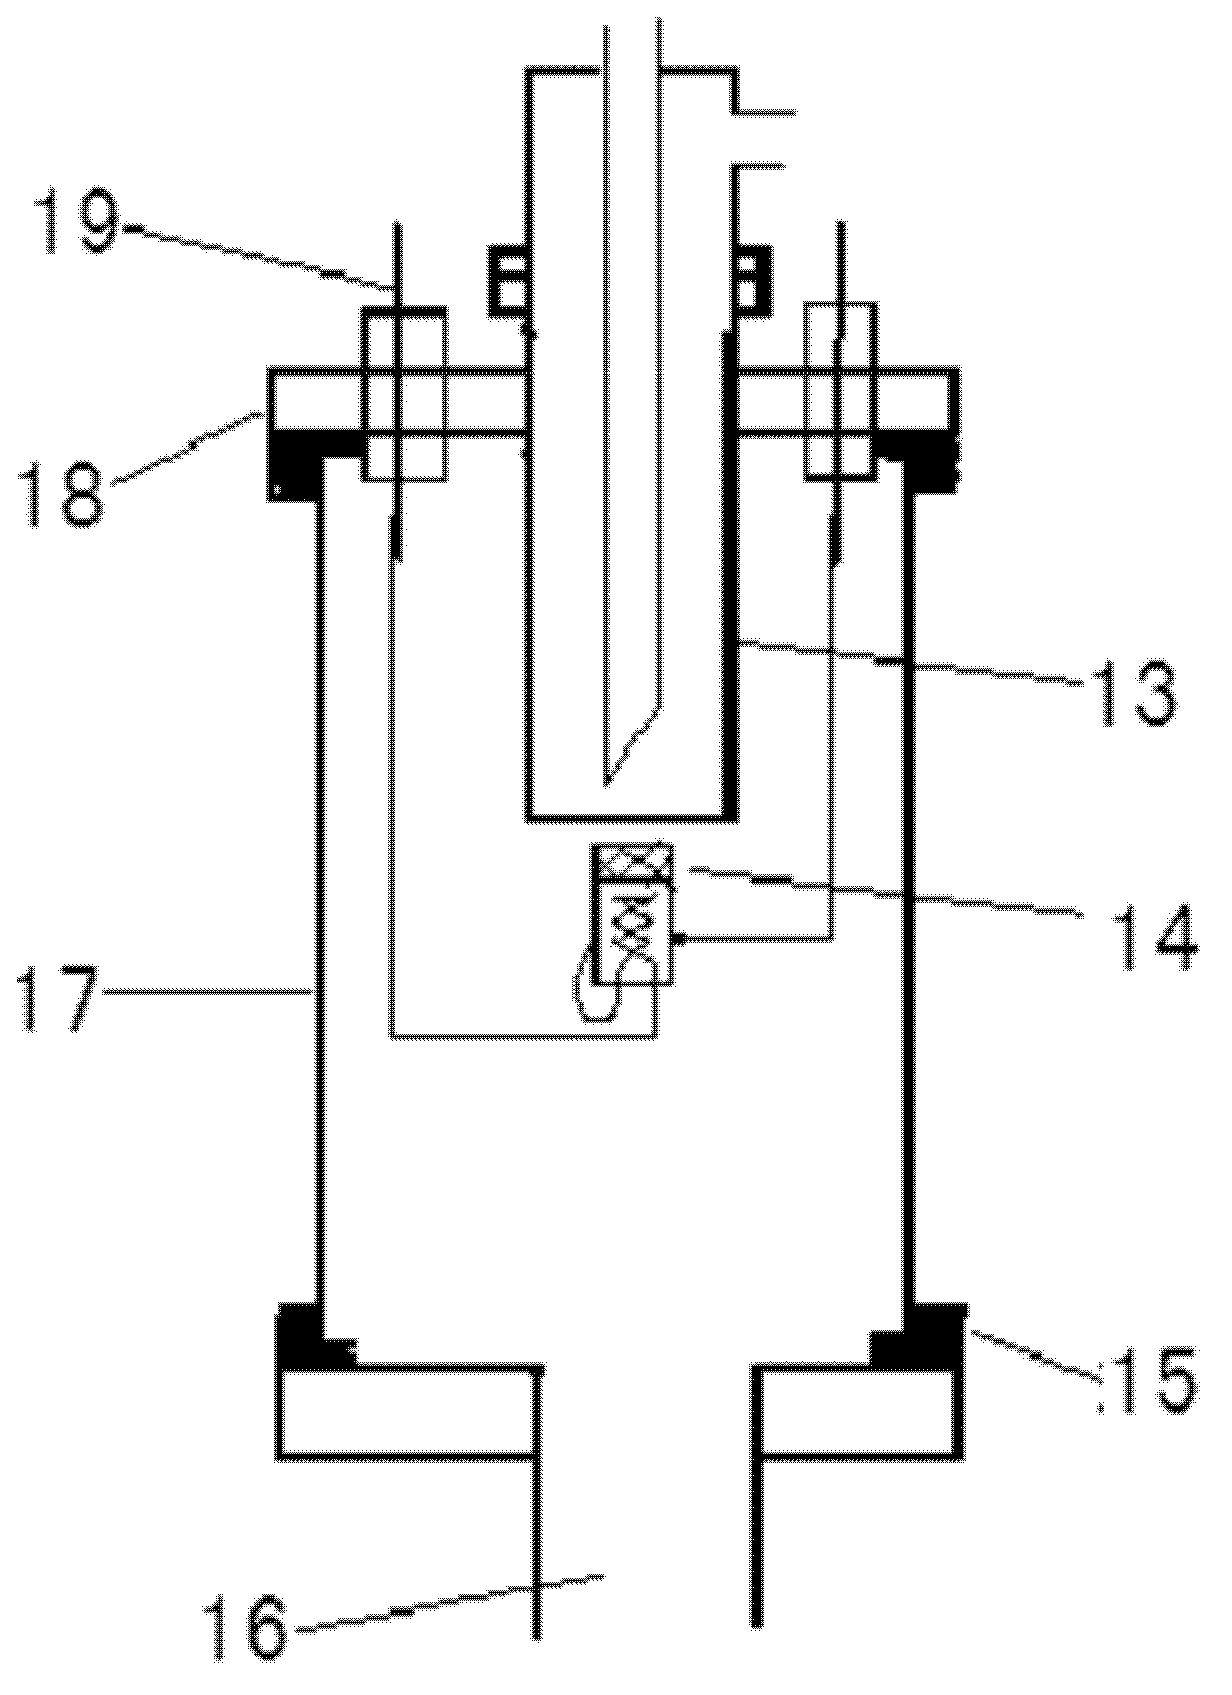 Cathode emission testing apparatus and system for microwave vacuum electronic devices